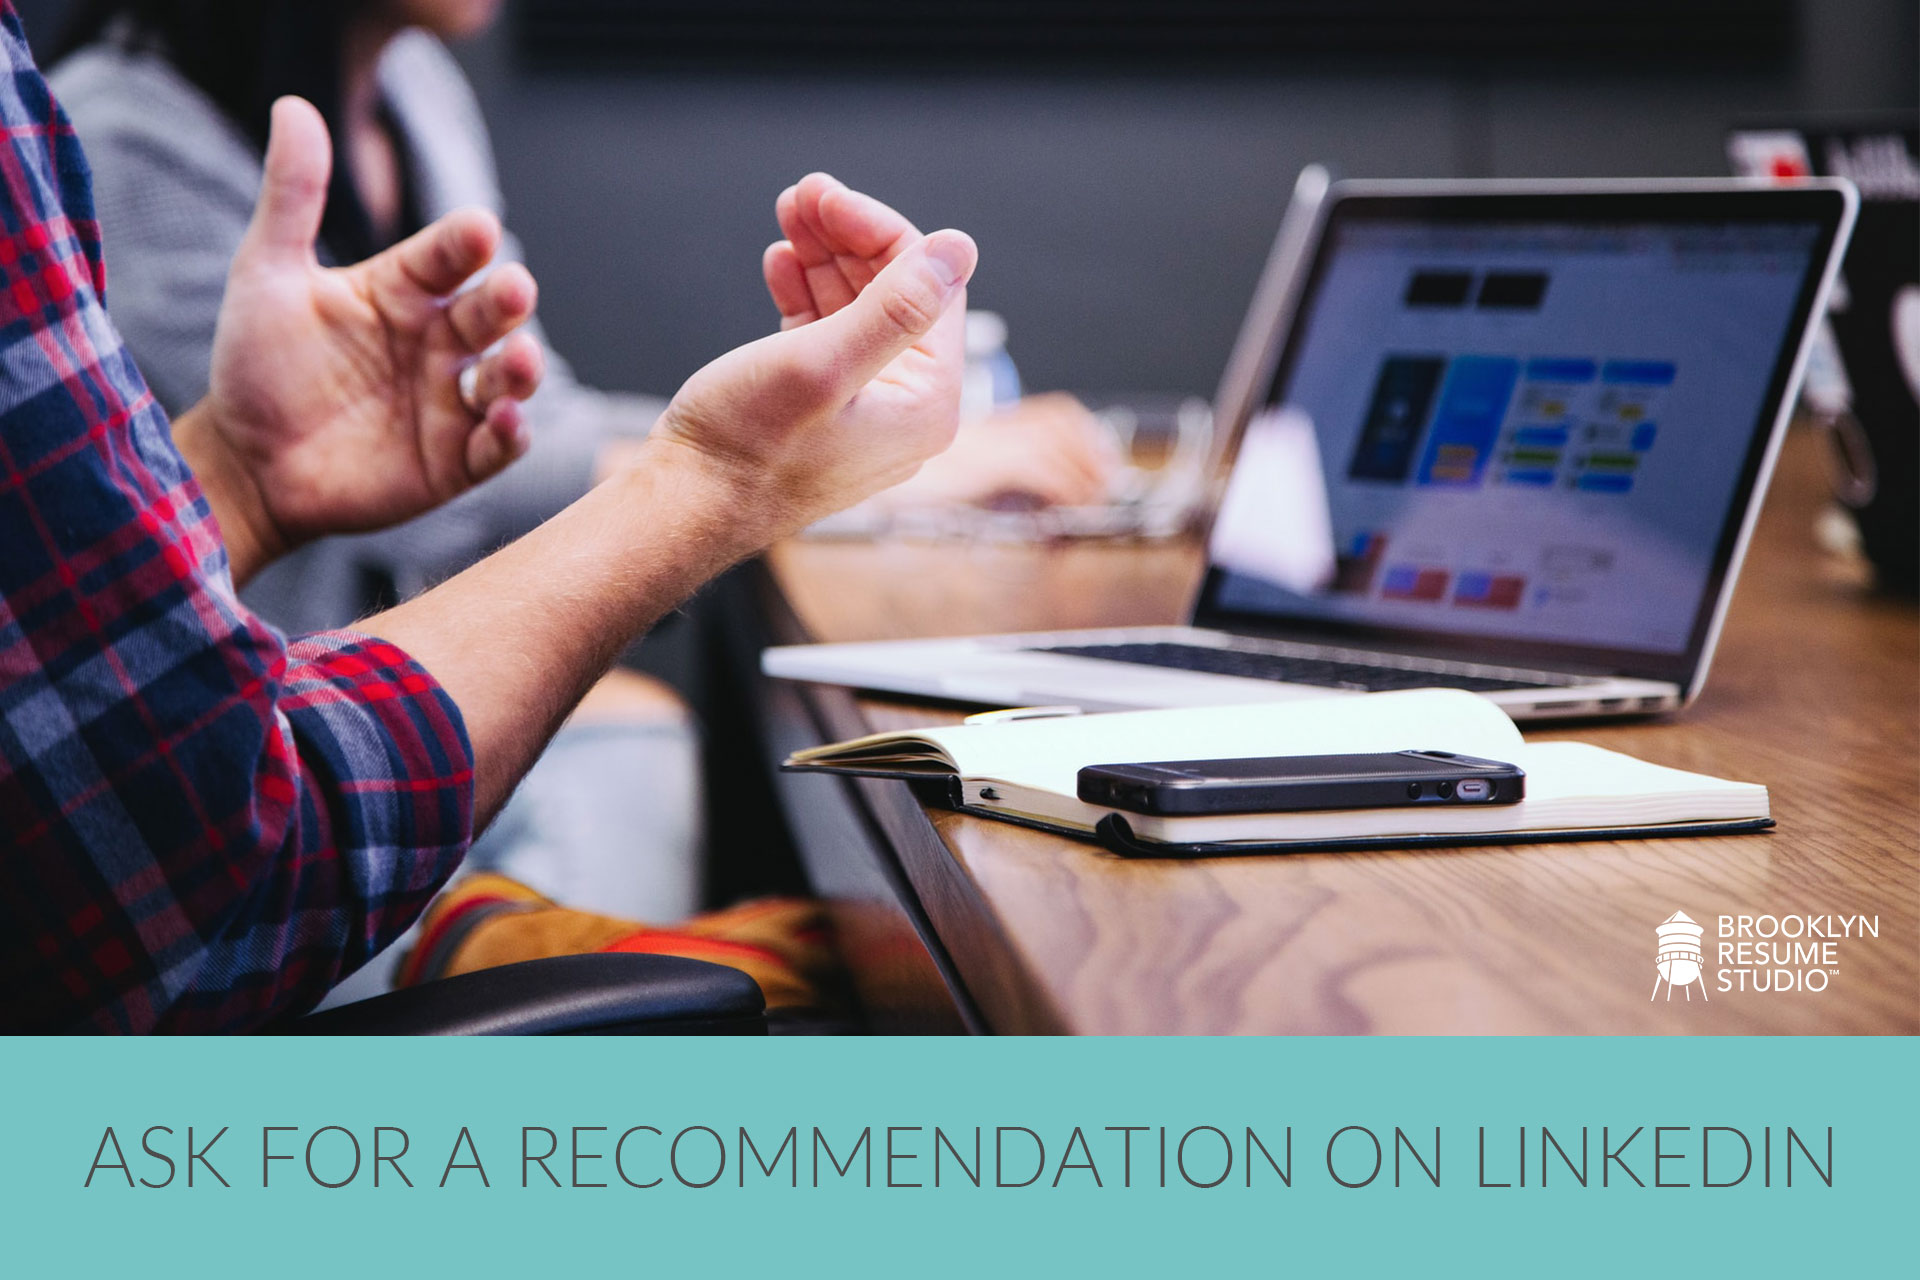 ask someone for a recommendation on LinkedIn